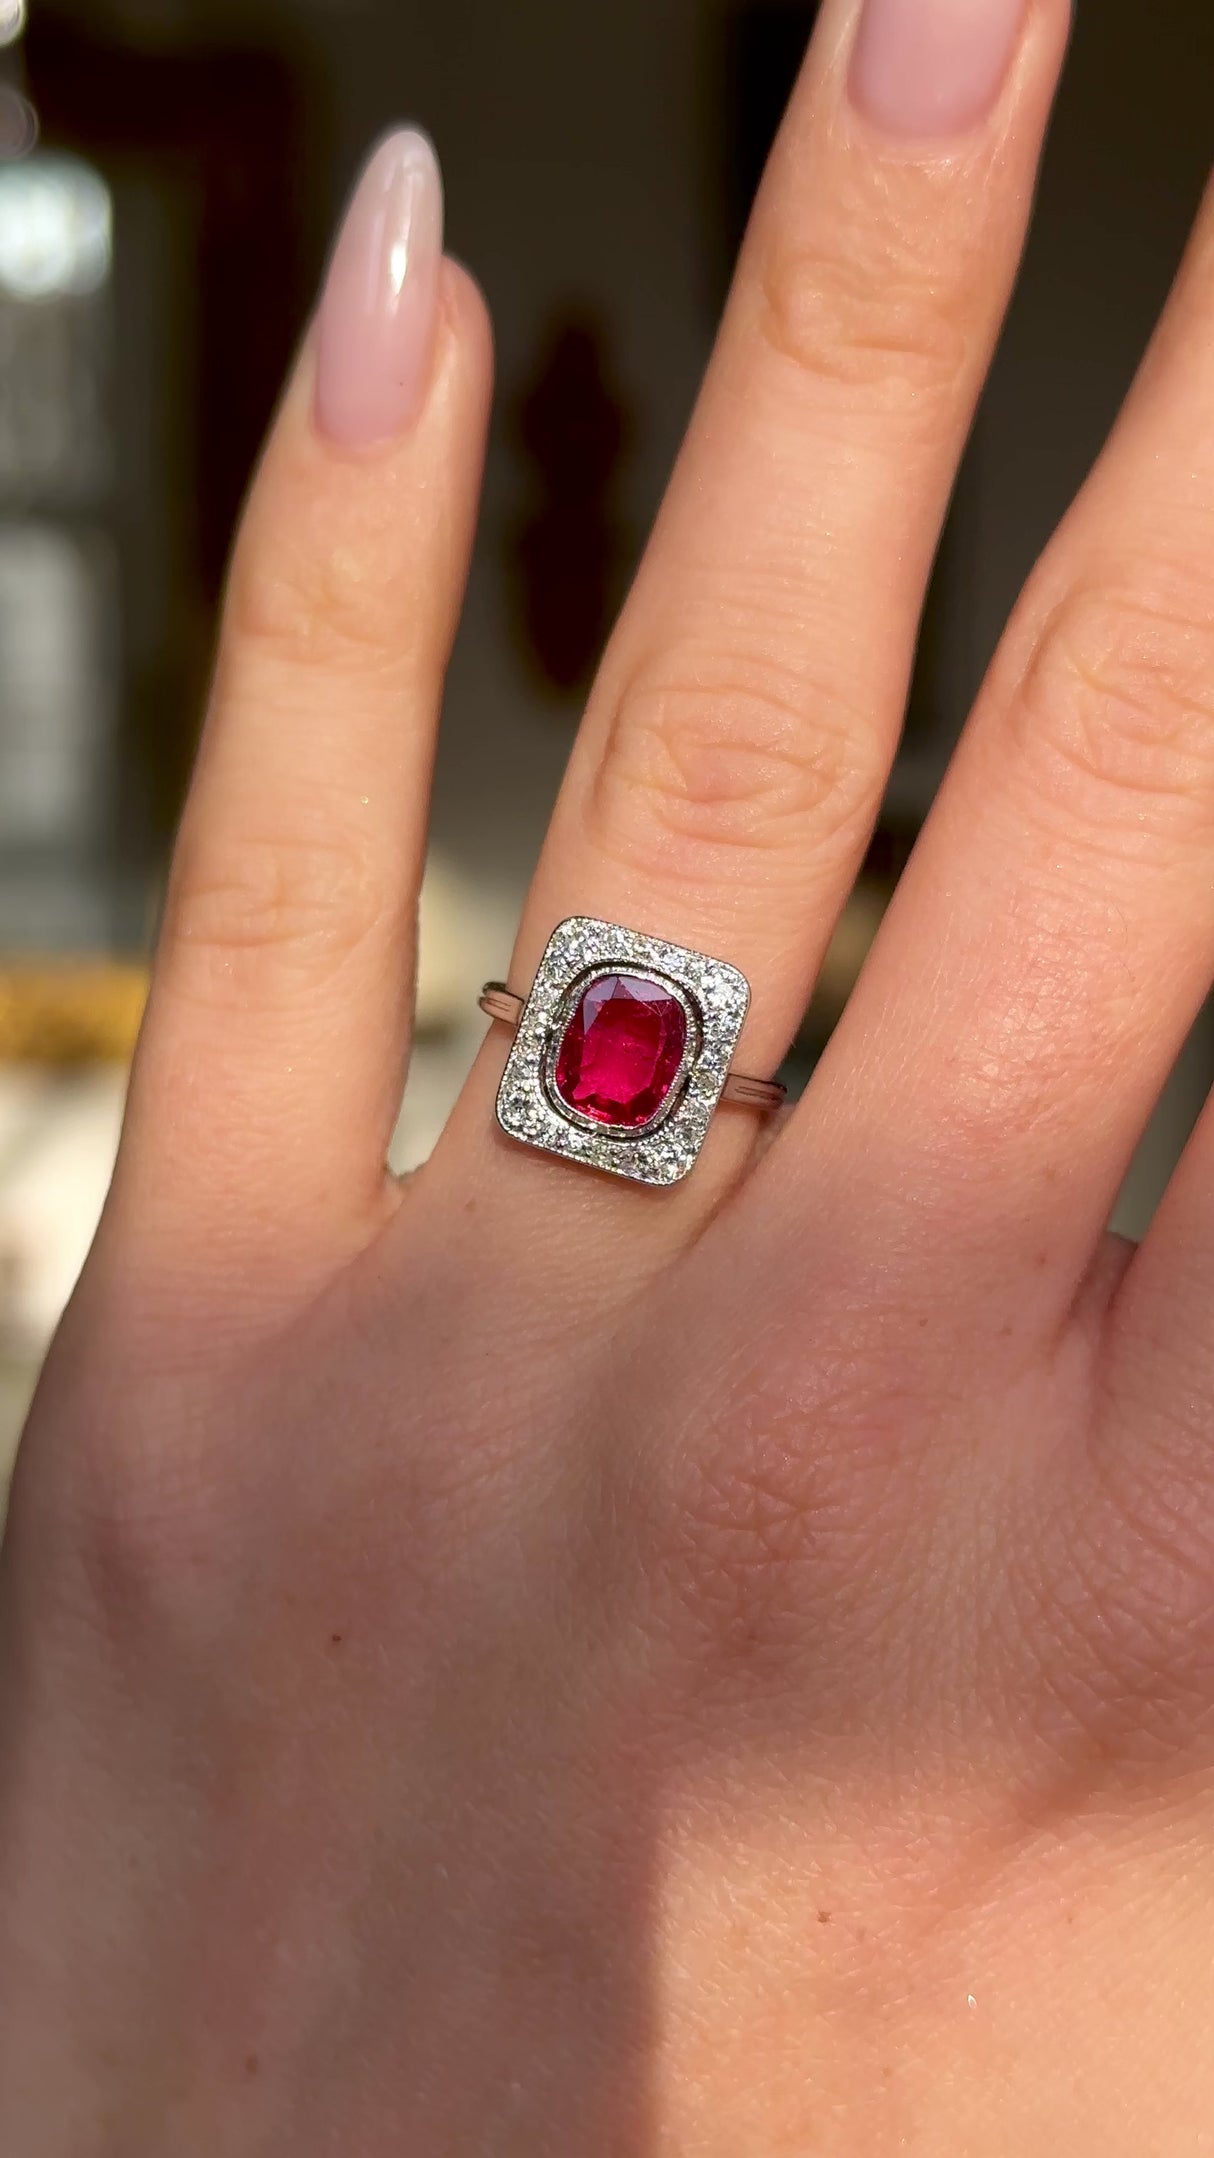 Vintage Art Deco ruby and diamond engagement ring worn on hand and moved around to give perspective.